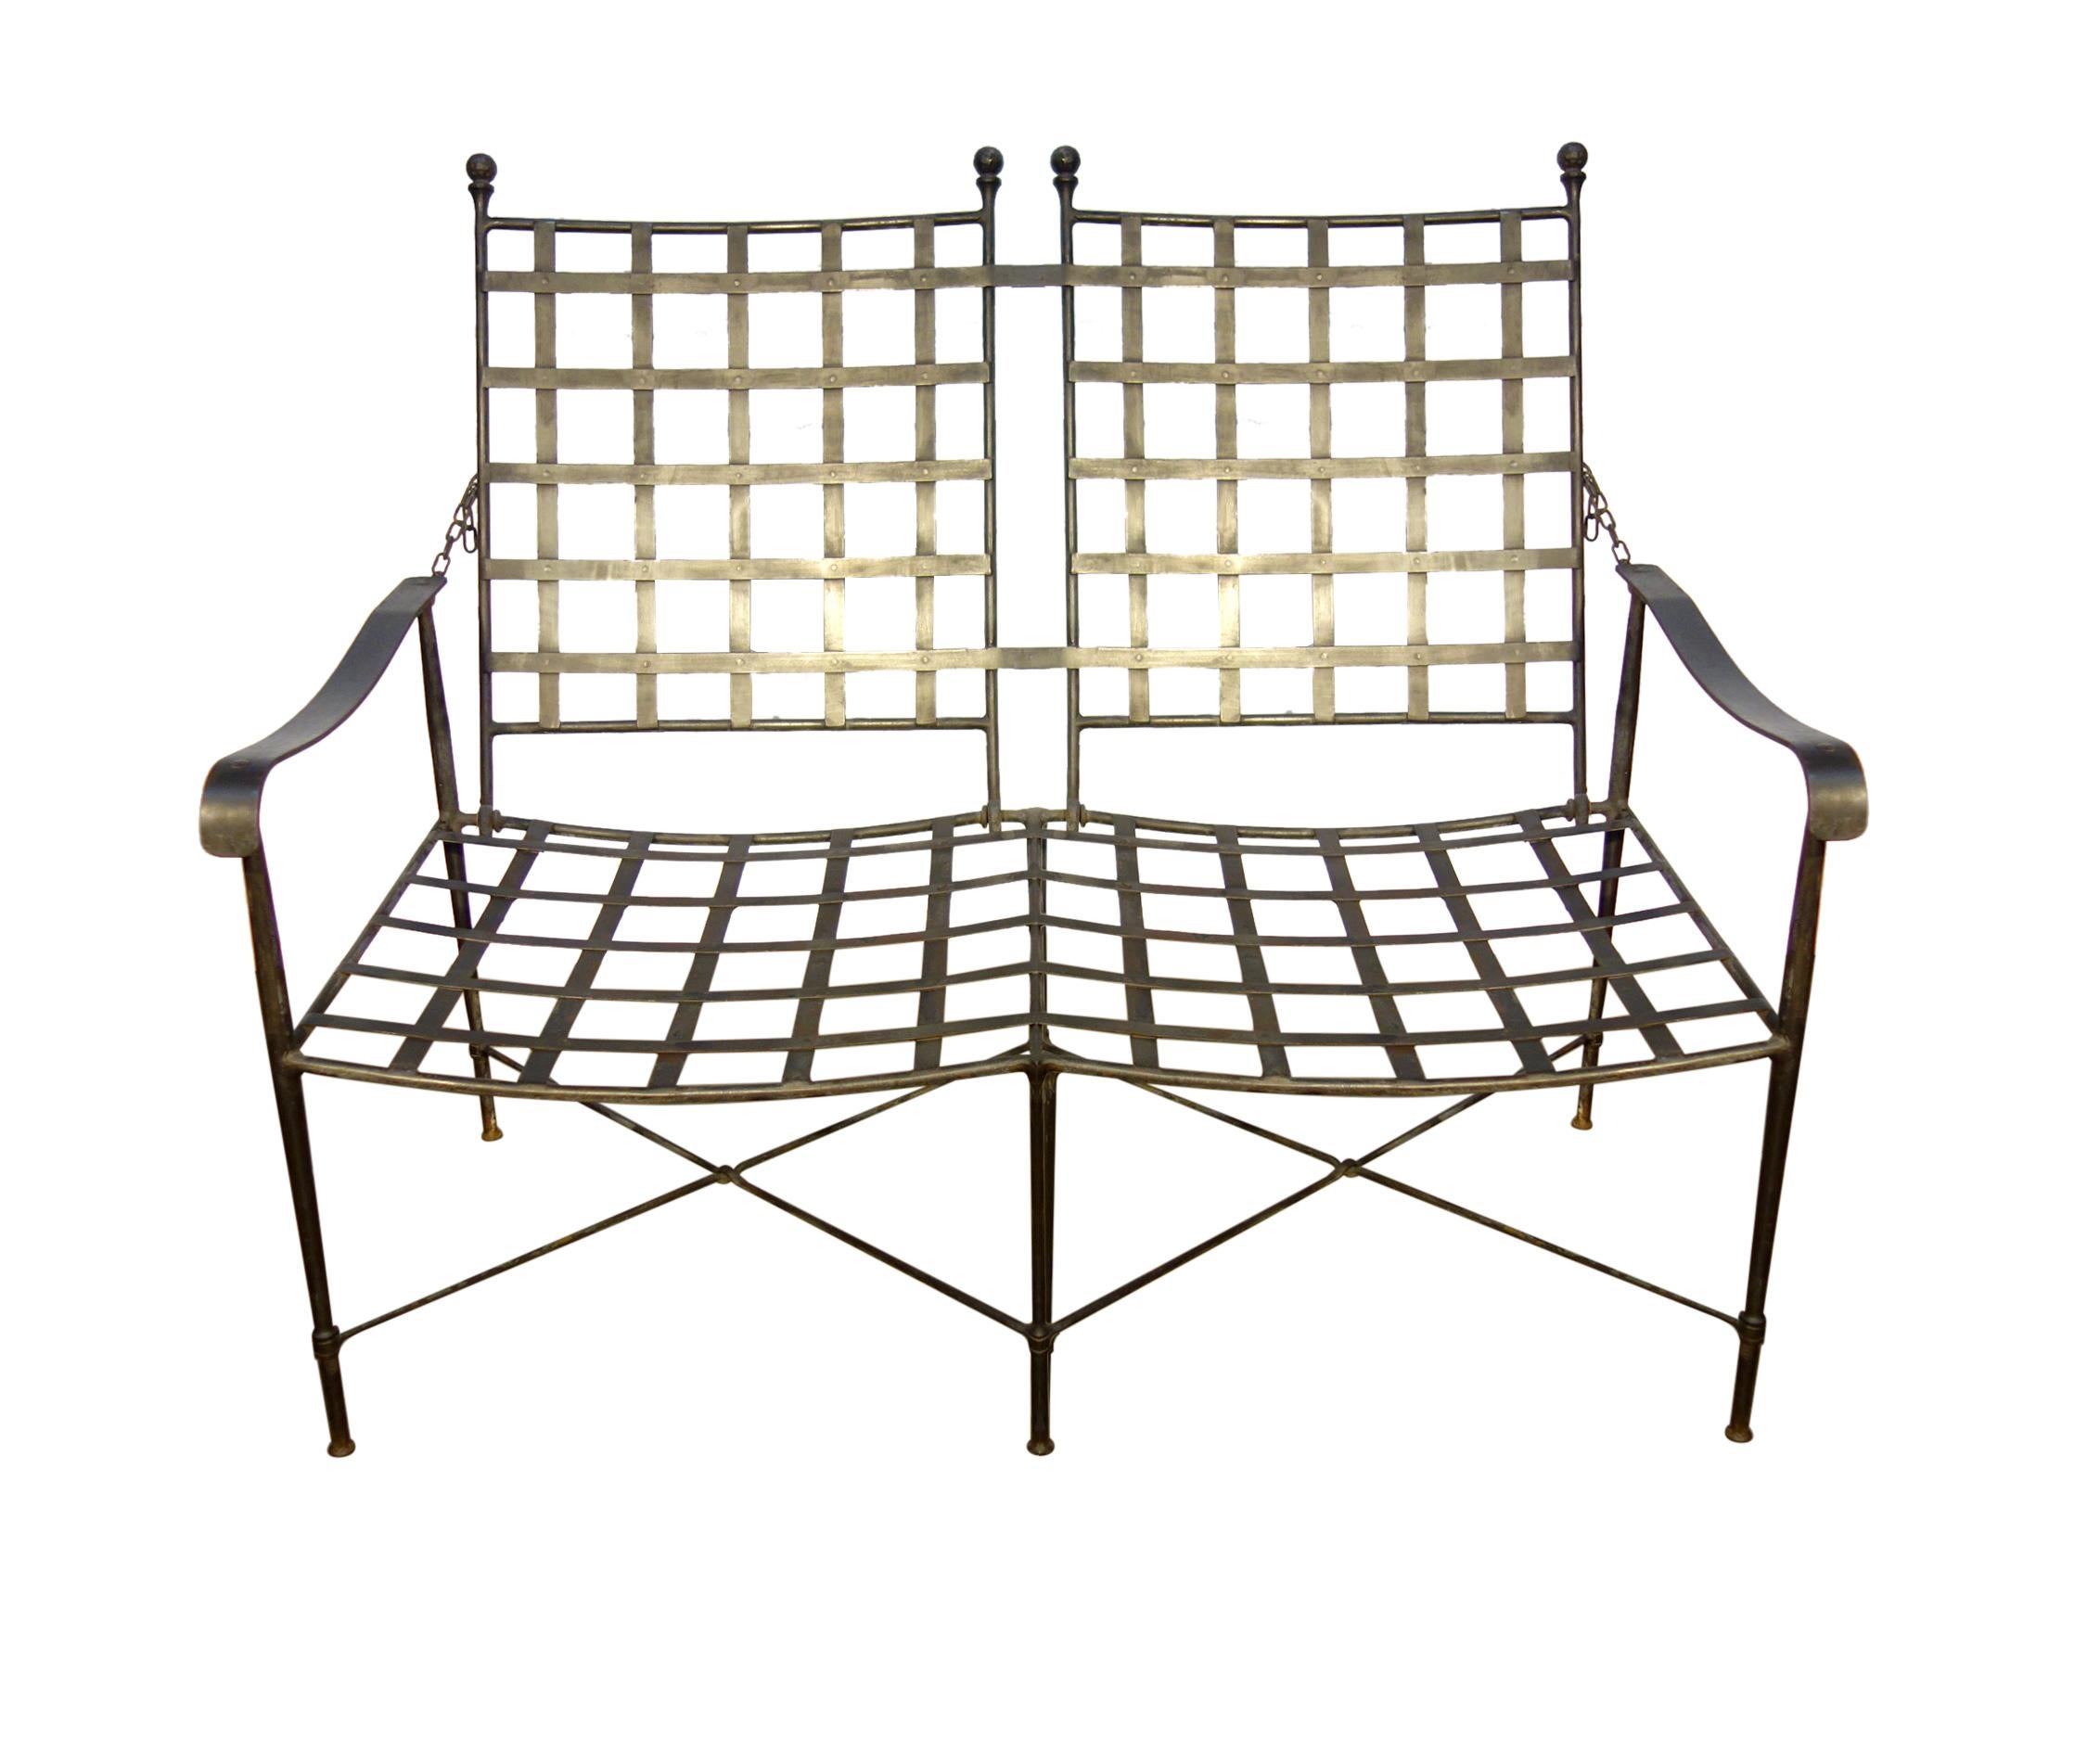 Exceptional Italian set of handcrafted hammered wrought iron chairs and reclining 2-seat bench with original patina. Welded frames. Welded lattice seats & riveted lattice backs are contoured for comfort. Hammered ball finials. Superb sleek design -